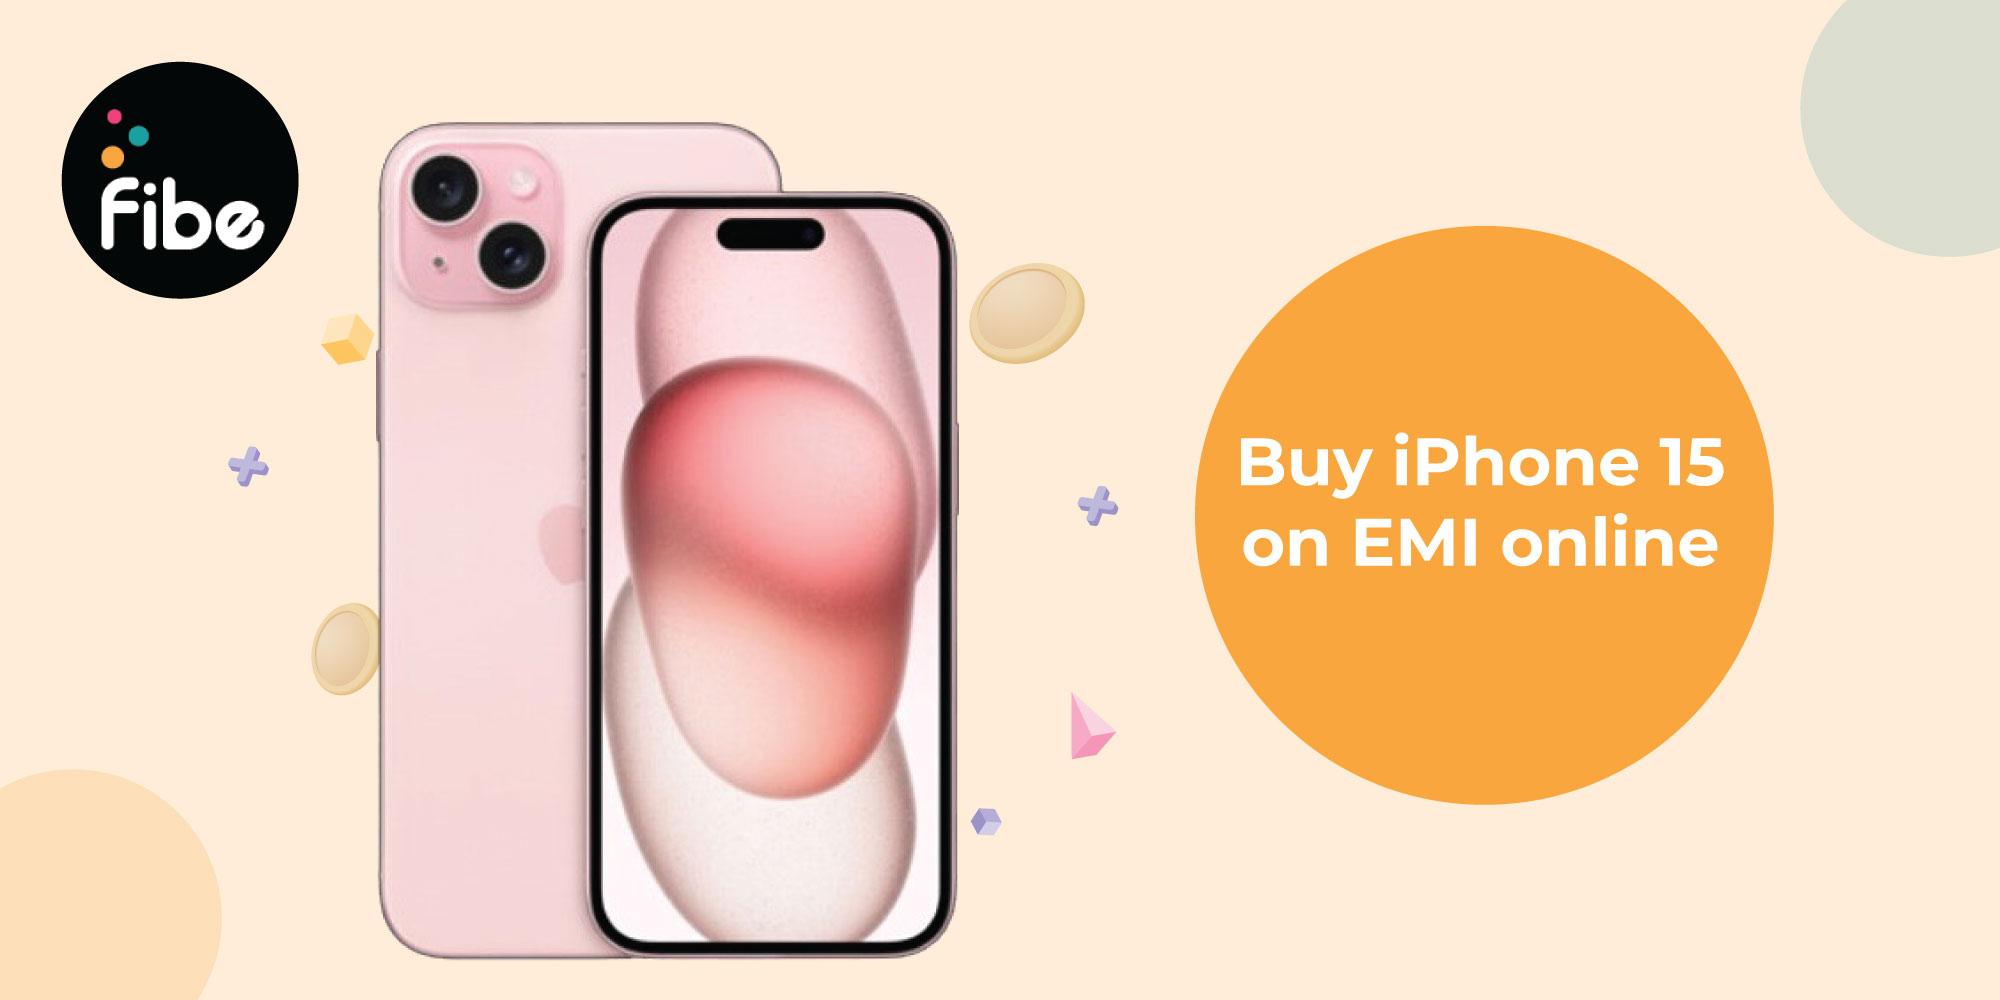 Buy an iPhone 15 on EMI with a Credit Card: Important Facts to Know